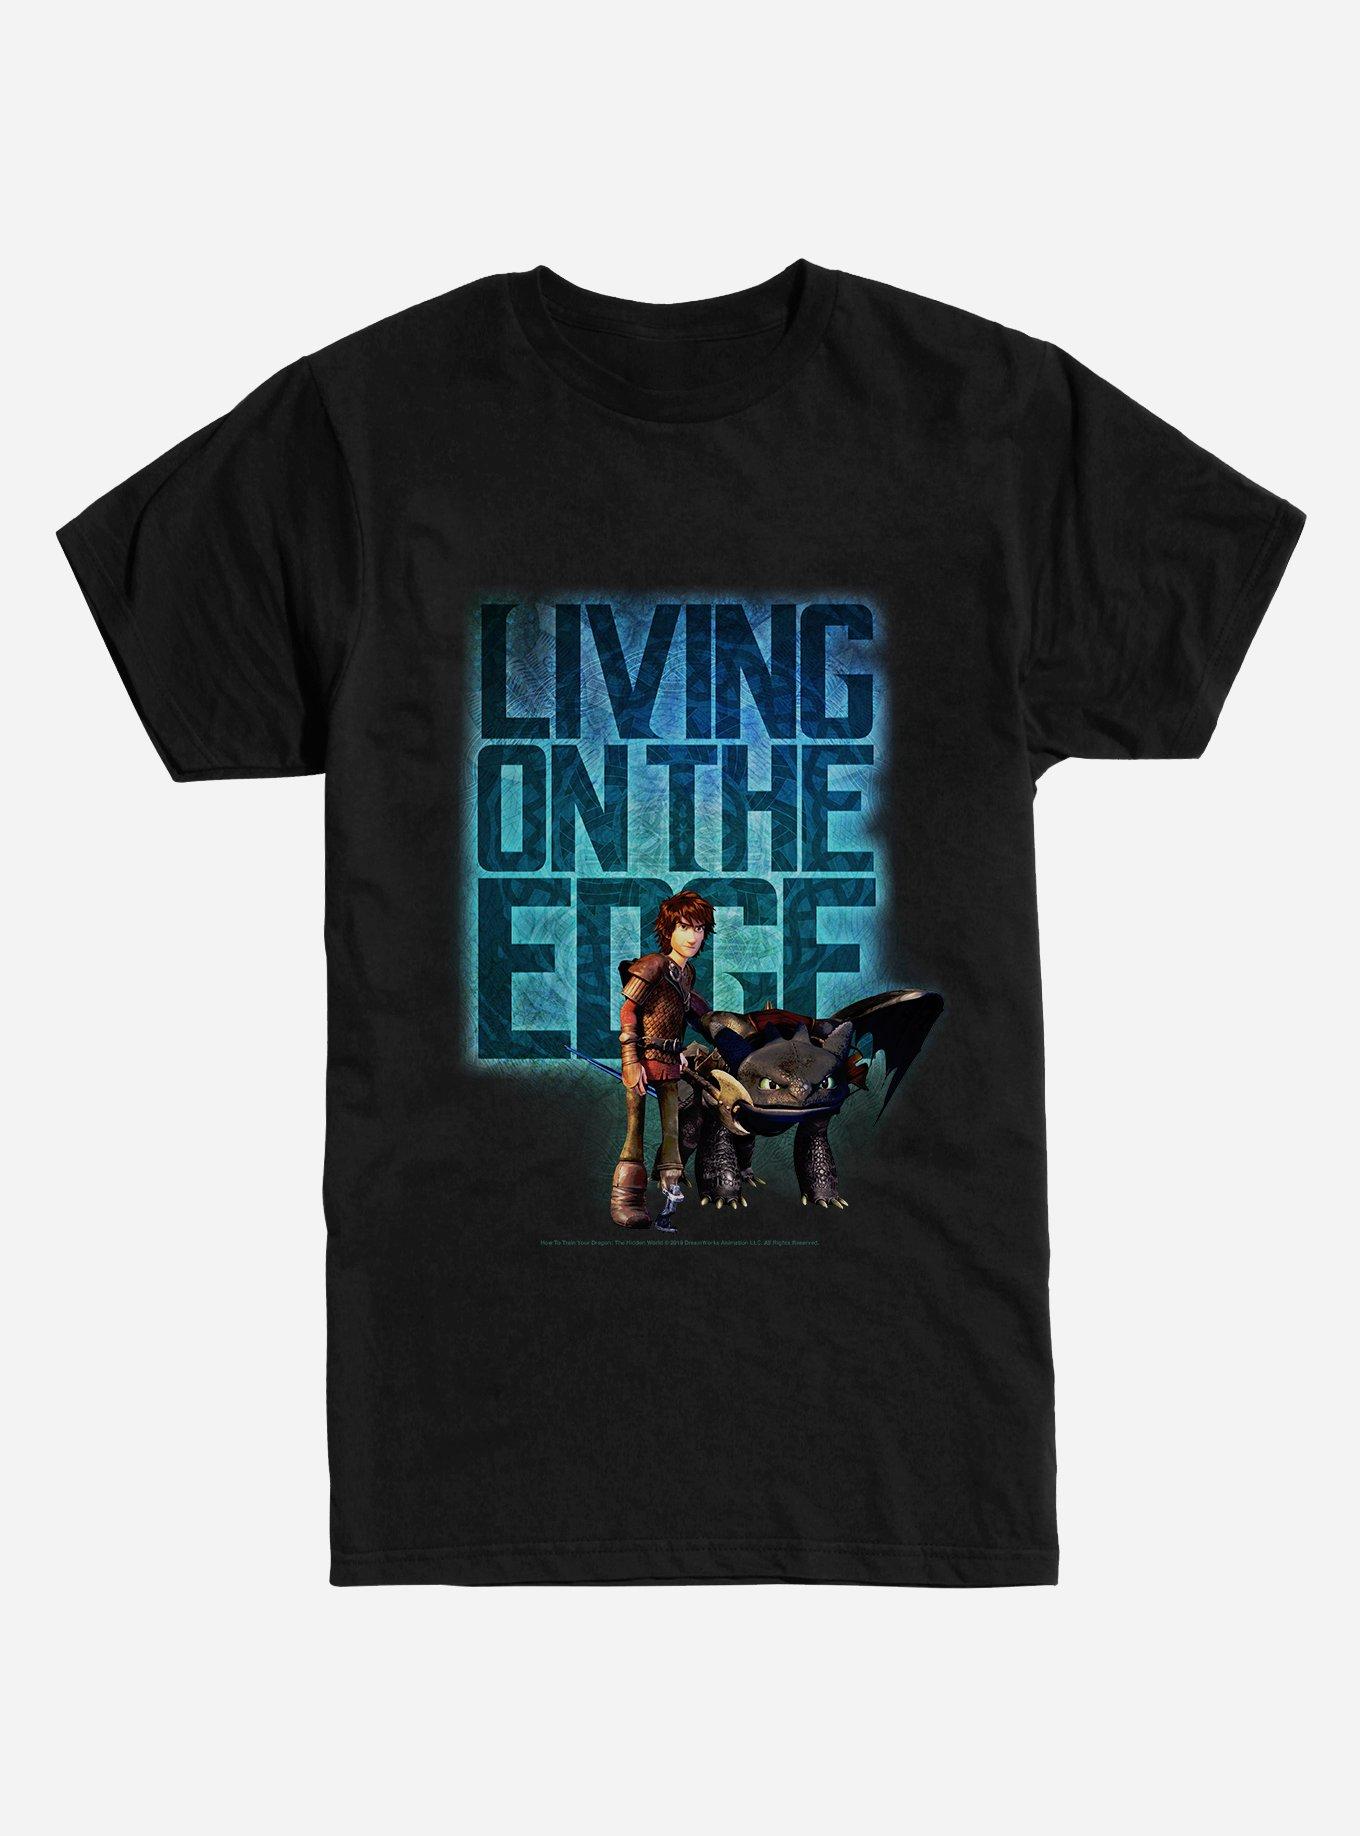 How To Train Your Dragon Living on the Edge T-Shirt, BLACK, hi-res